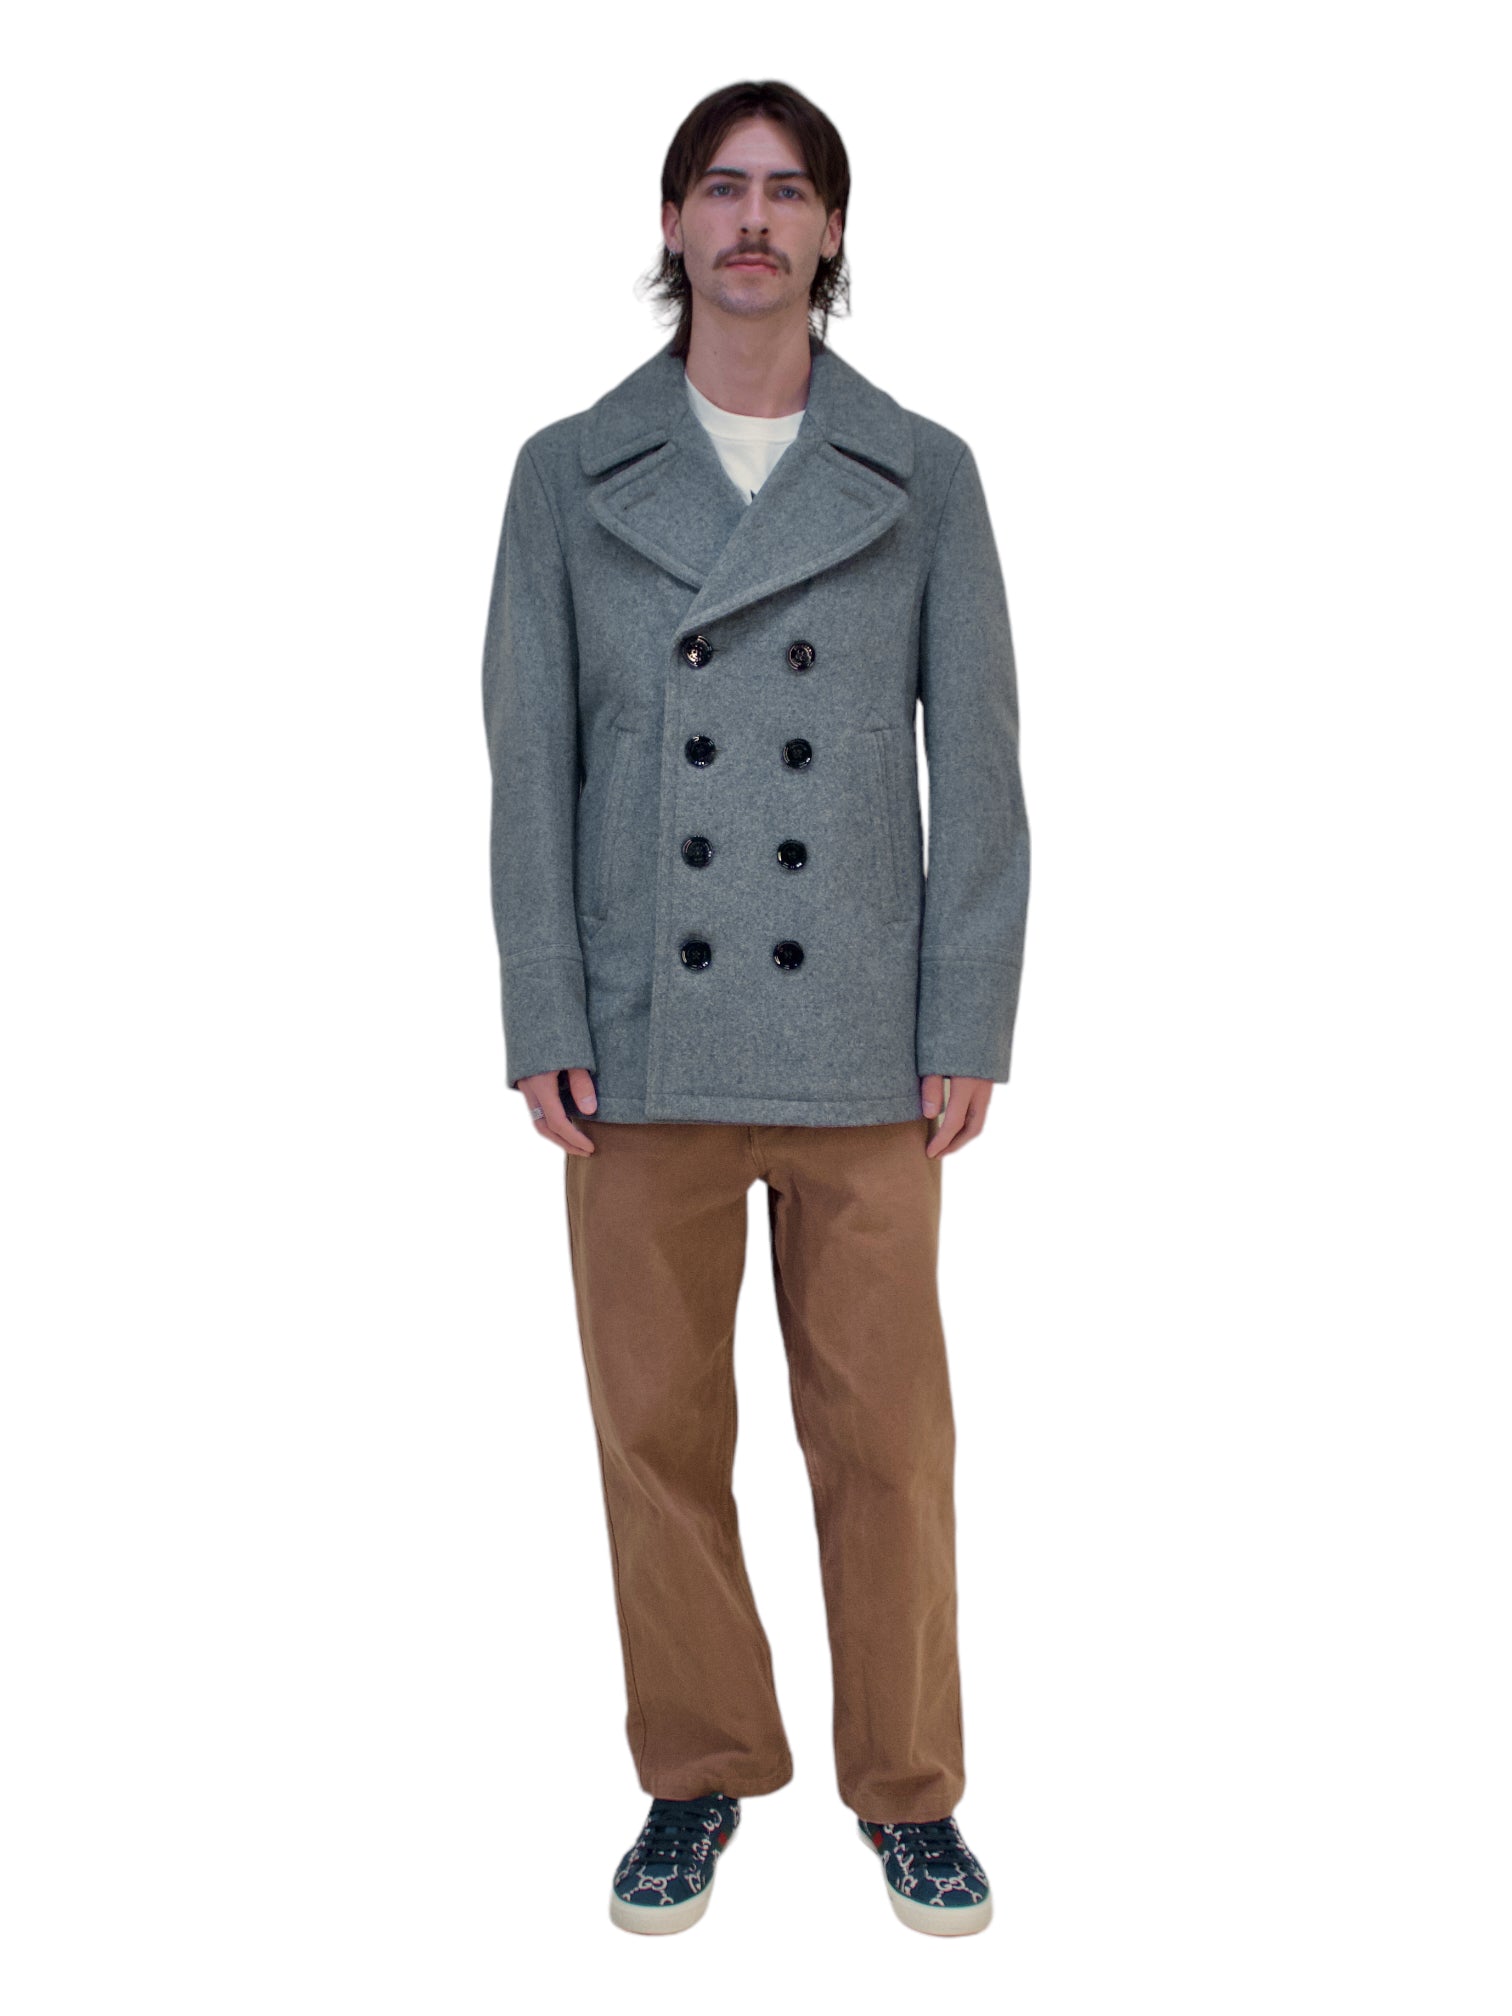 Burberry Brit Heather Grey Wool Blend Peacoat Jacket - Genuine Design Luxury Consignment. New & Pre-Owned Clothing, Shoes, & Accessories. Calgary, Canada